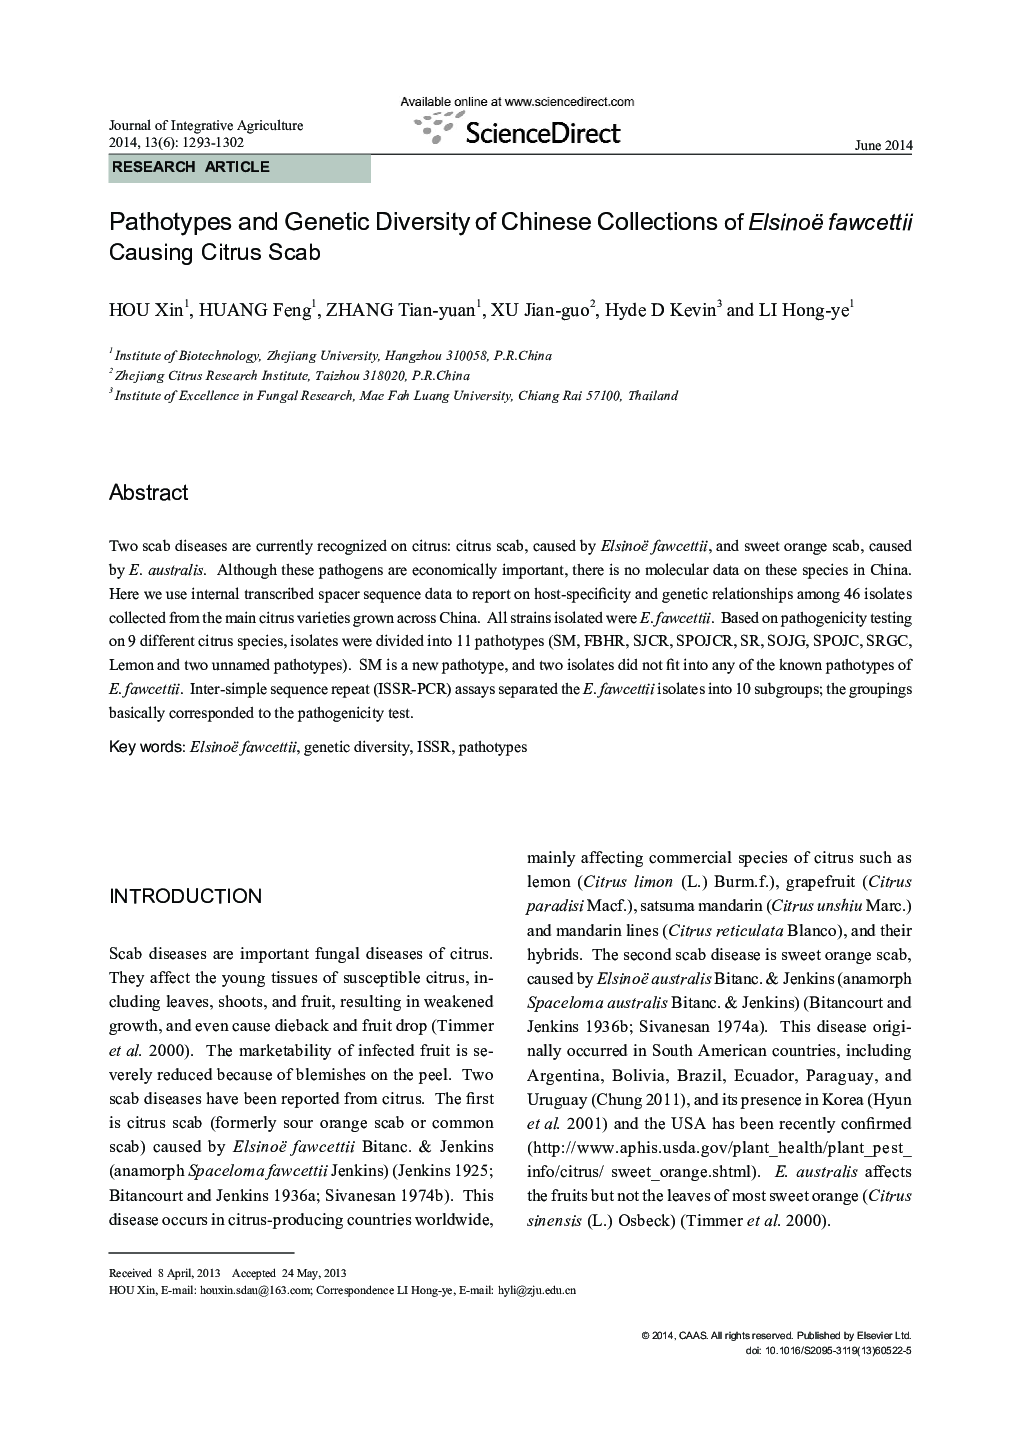 Pathotypes and Genetic Diversity of Chinese Collections of Elsinoë fawcettii Causing Citrus Scab